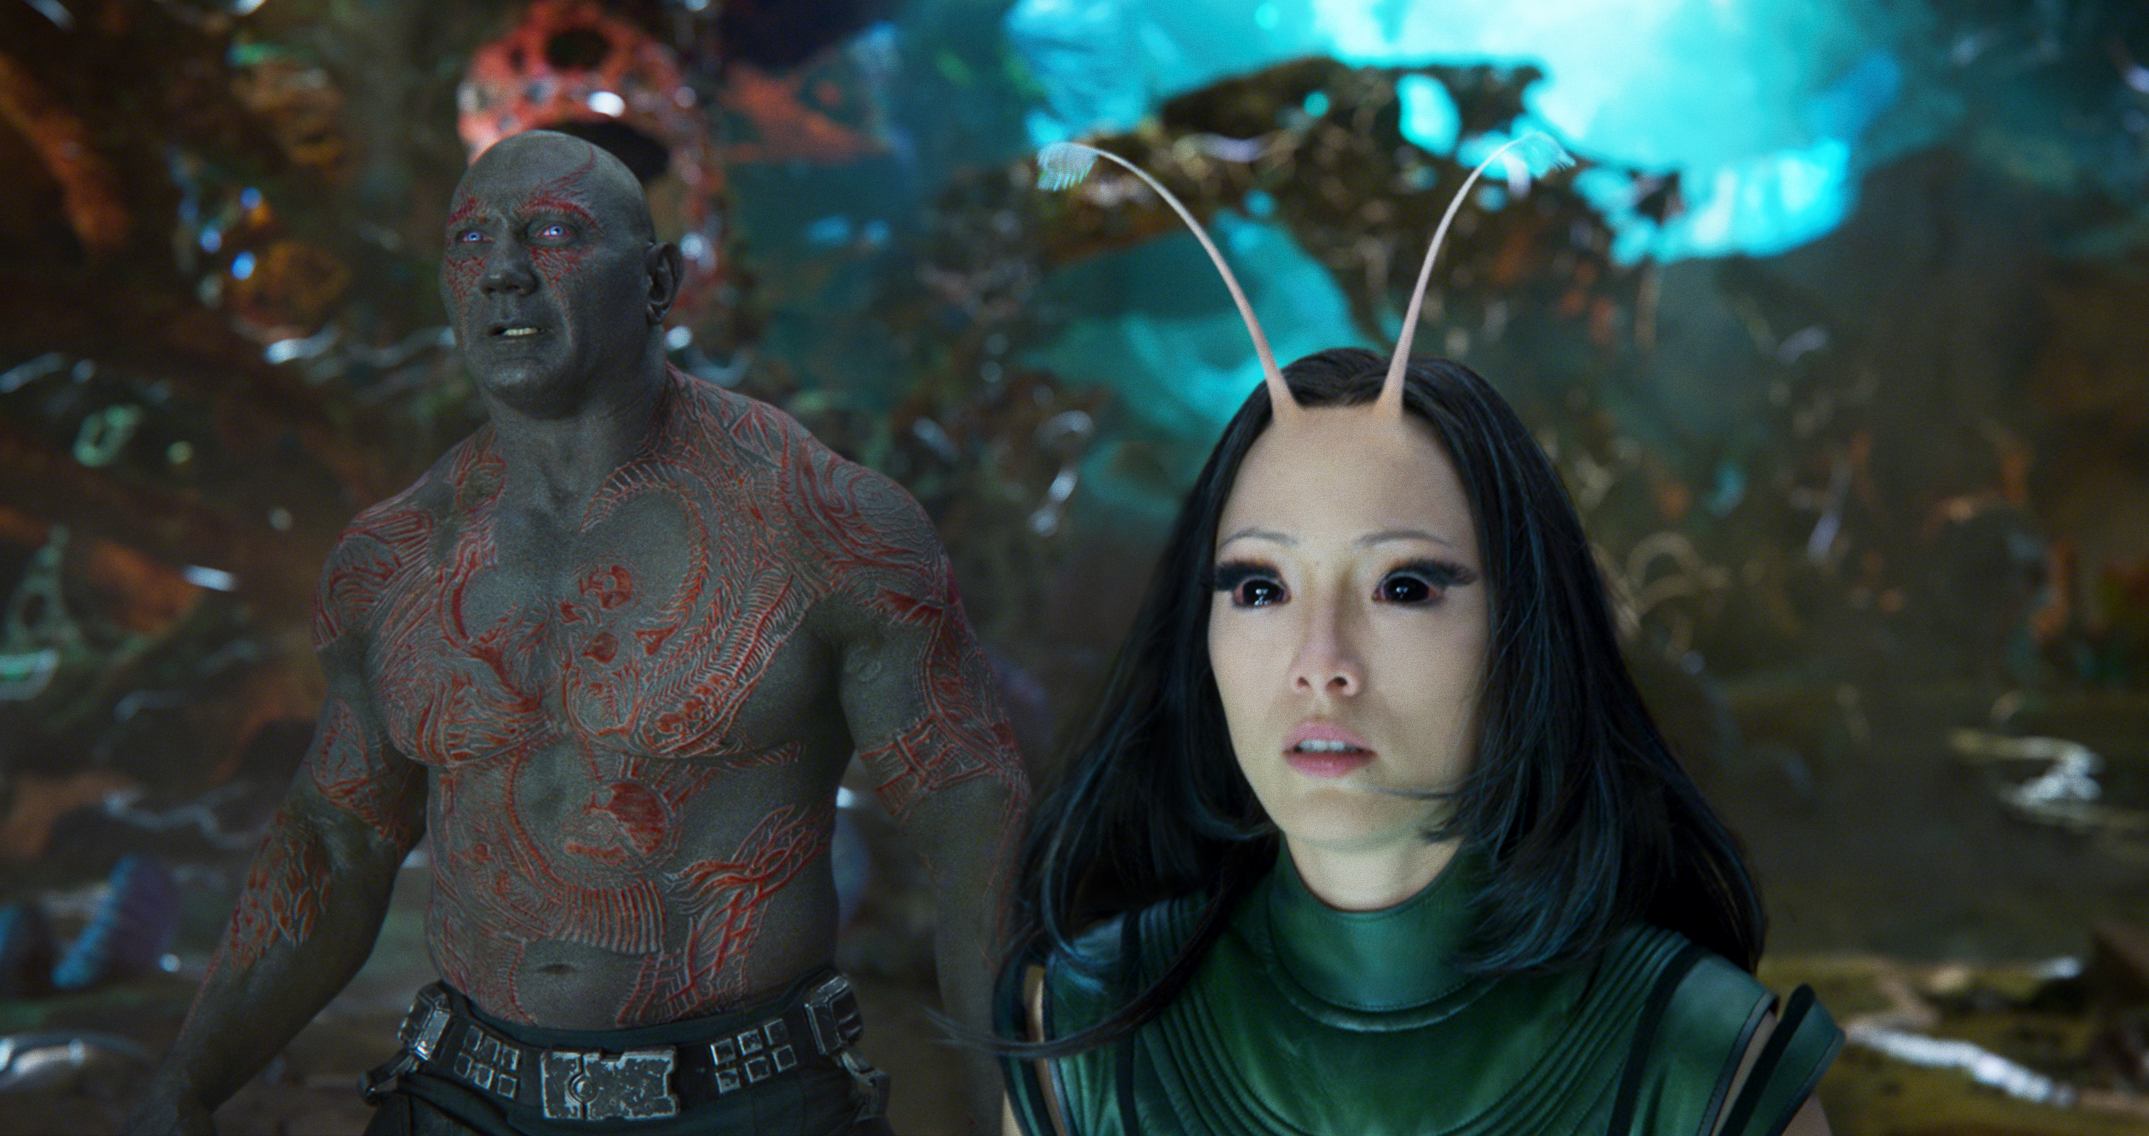 From left: Dave Bautista and Pom Klementieff in <i>Guardians Of The Galaxy Vol. 2</i>. (©Marvel Studios)